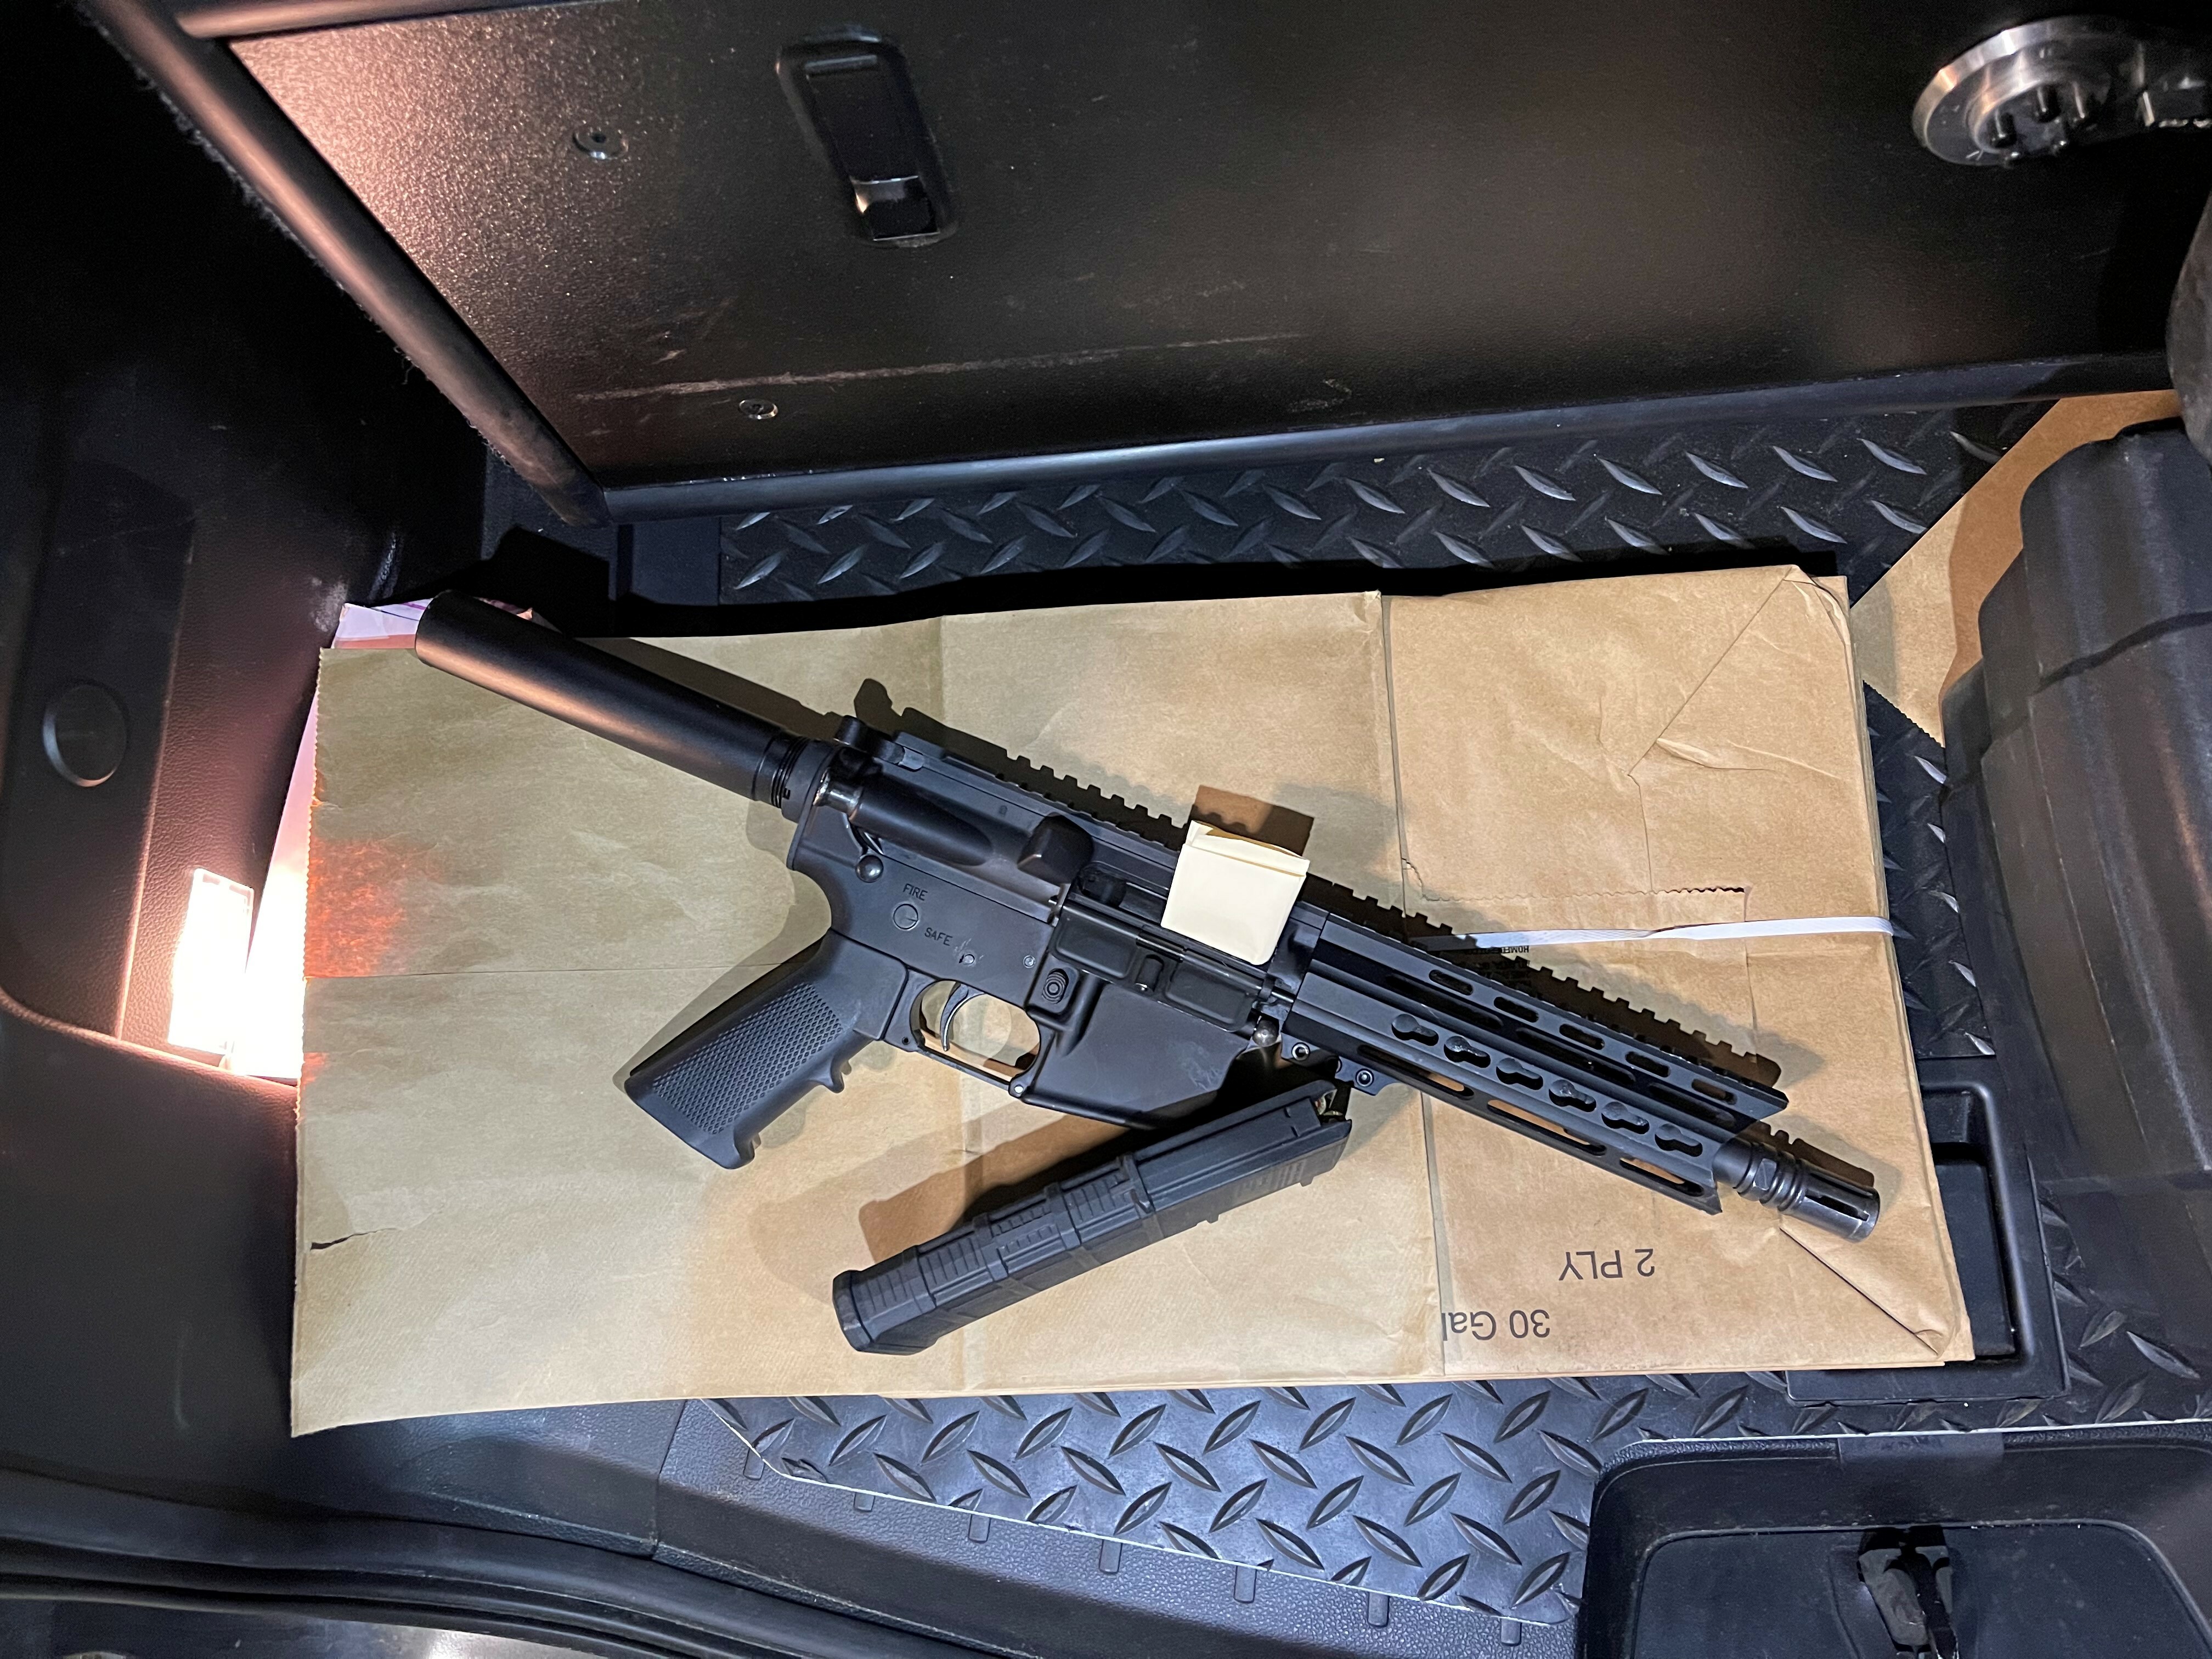 Recovered Firearm